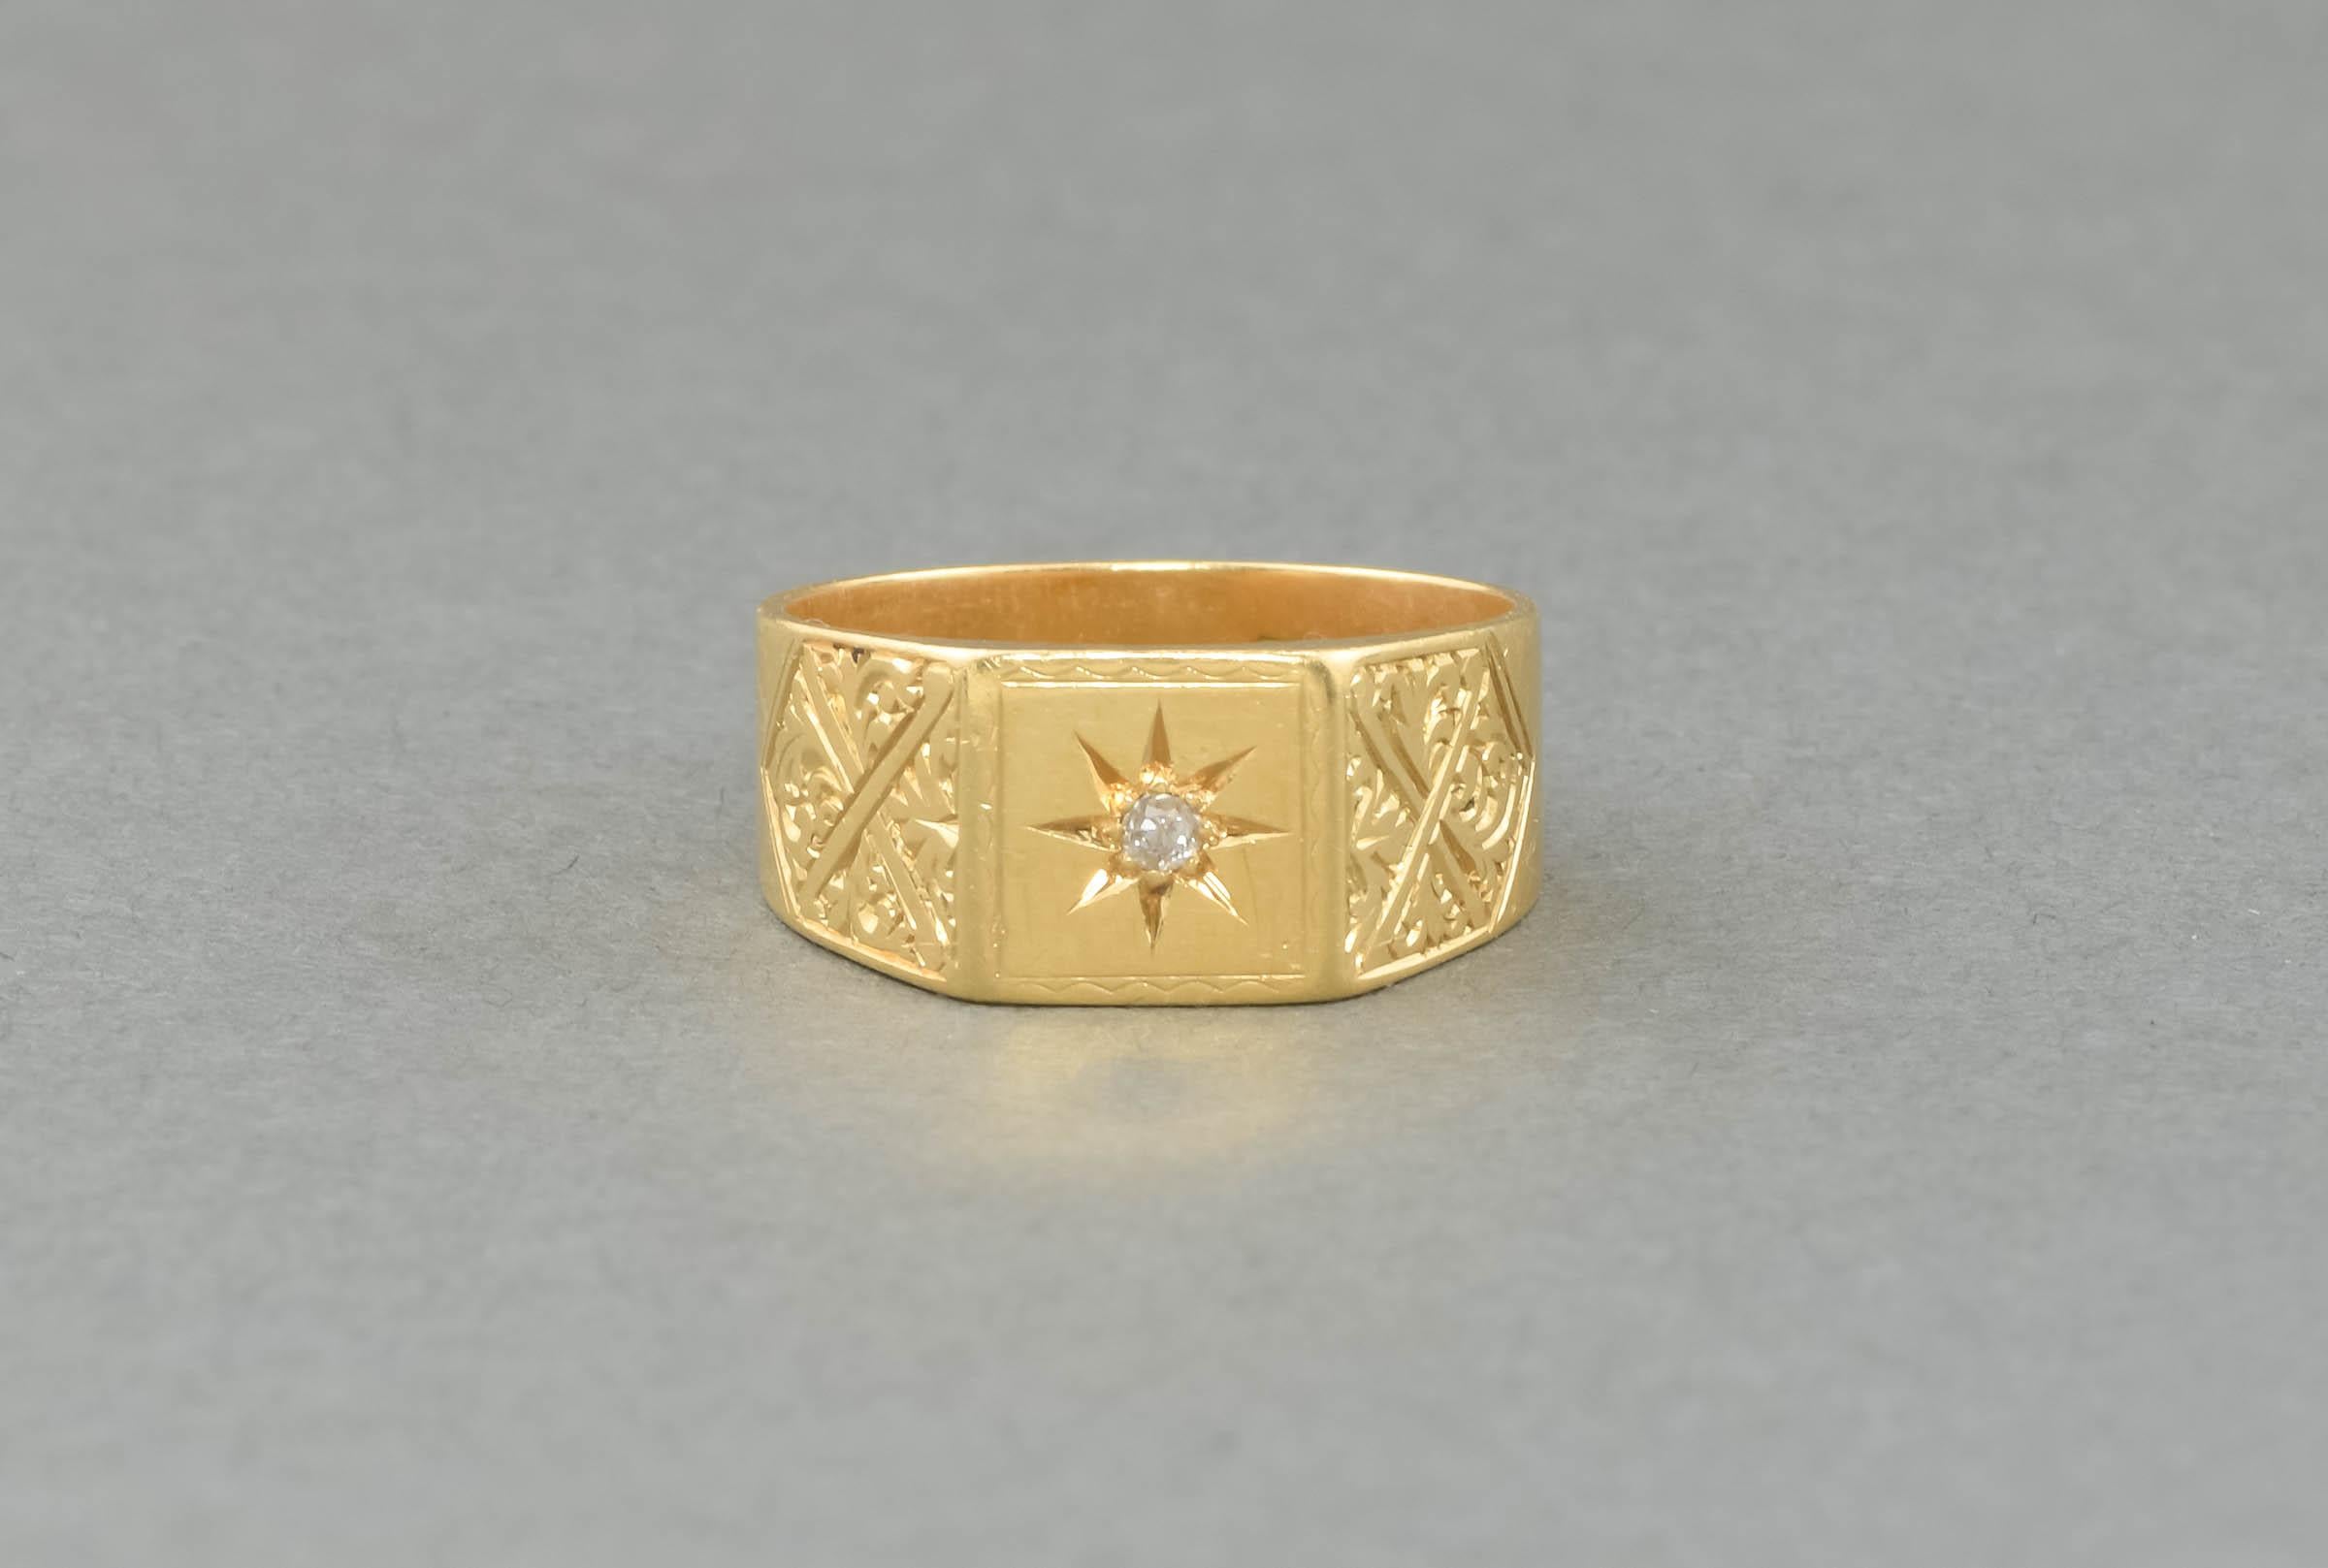 18K Gold Diamond Star Signet Ring with Engraved Shoulders, hallmarked 1929 1